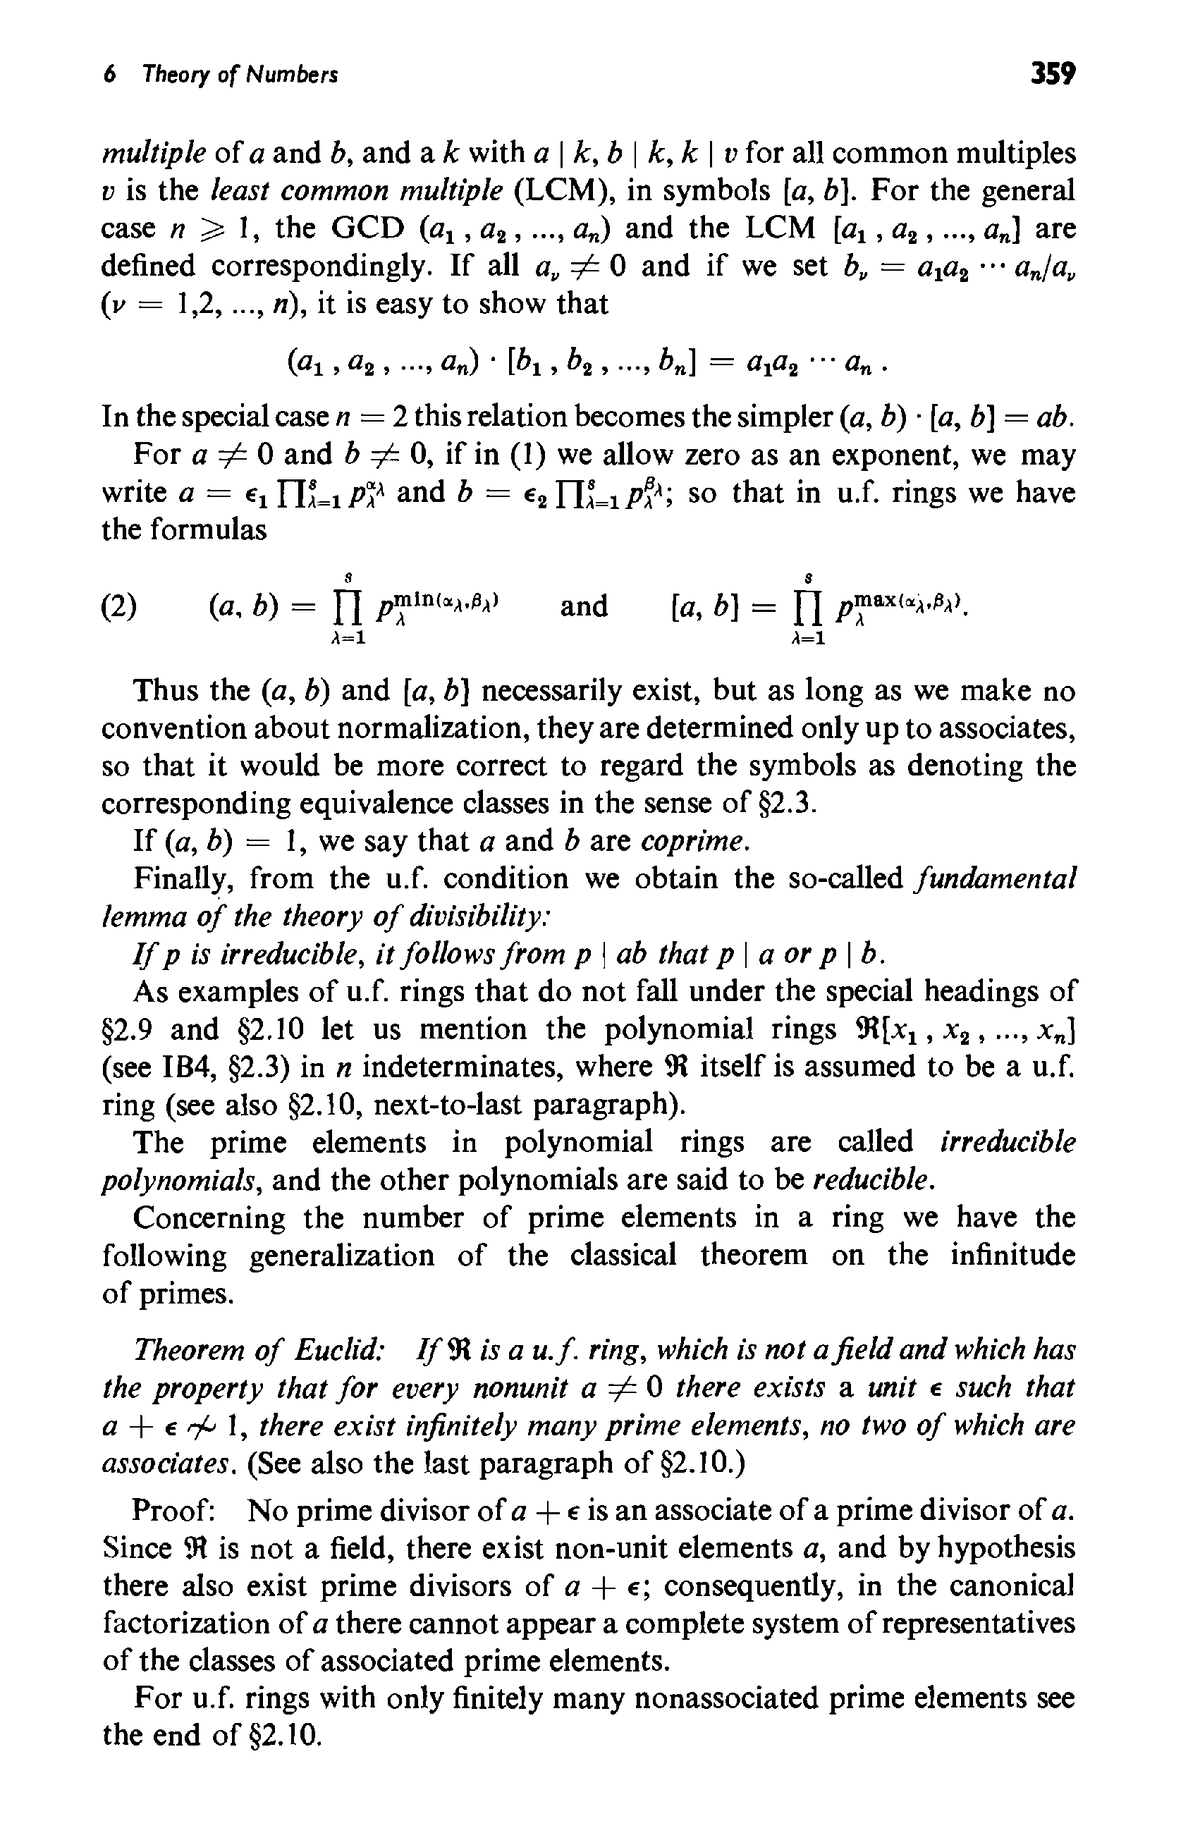 fundamentals-of-mathematics-the-real-number-system-and-algebra-38-6